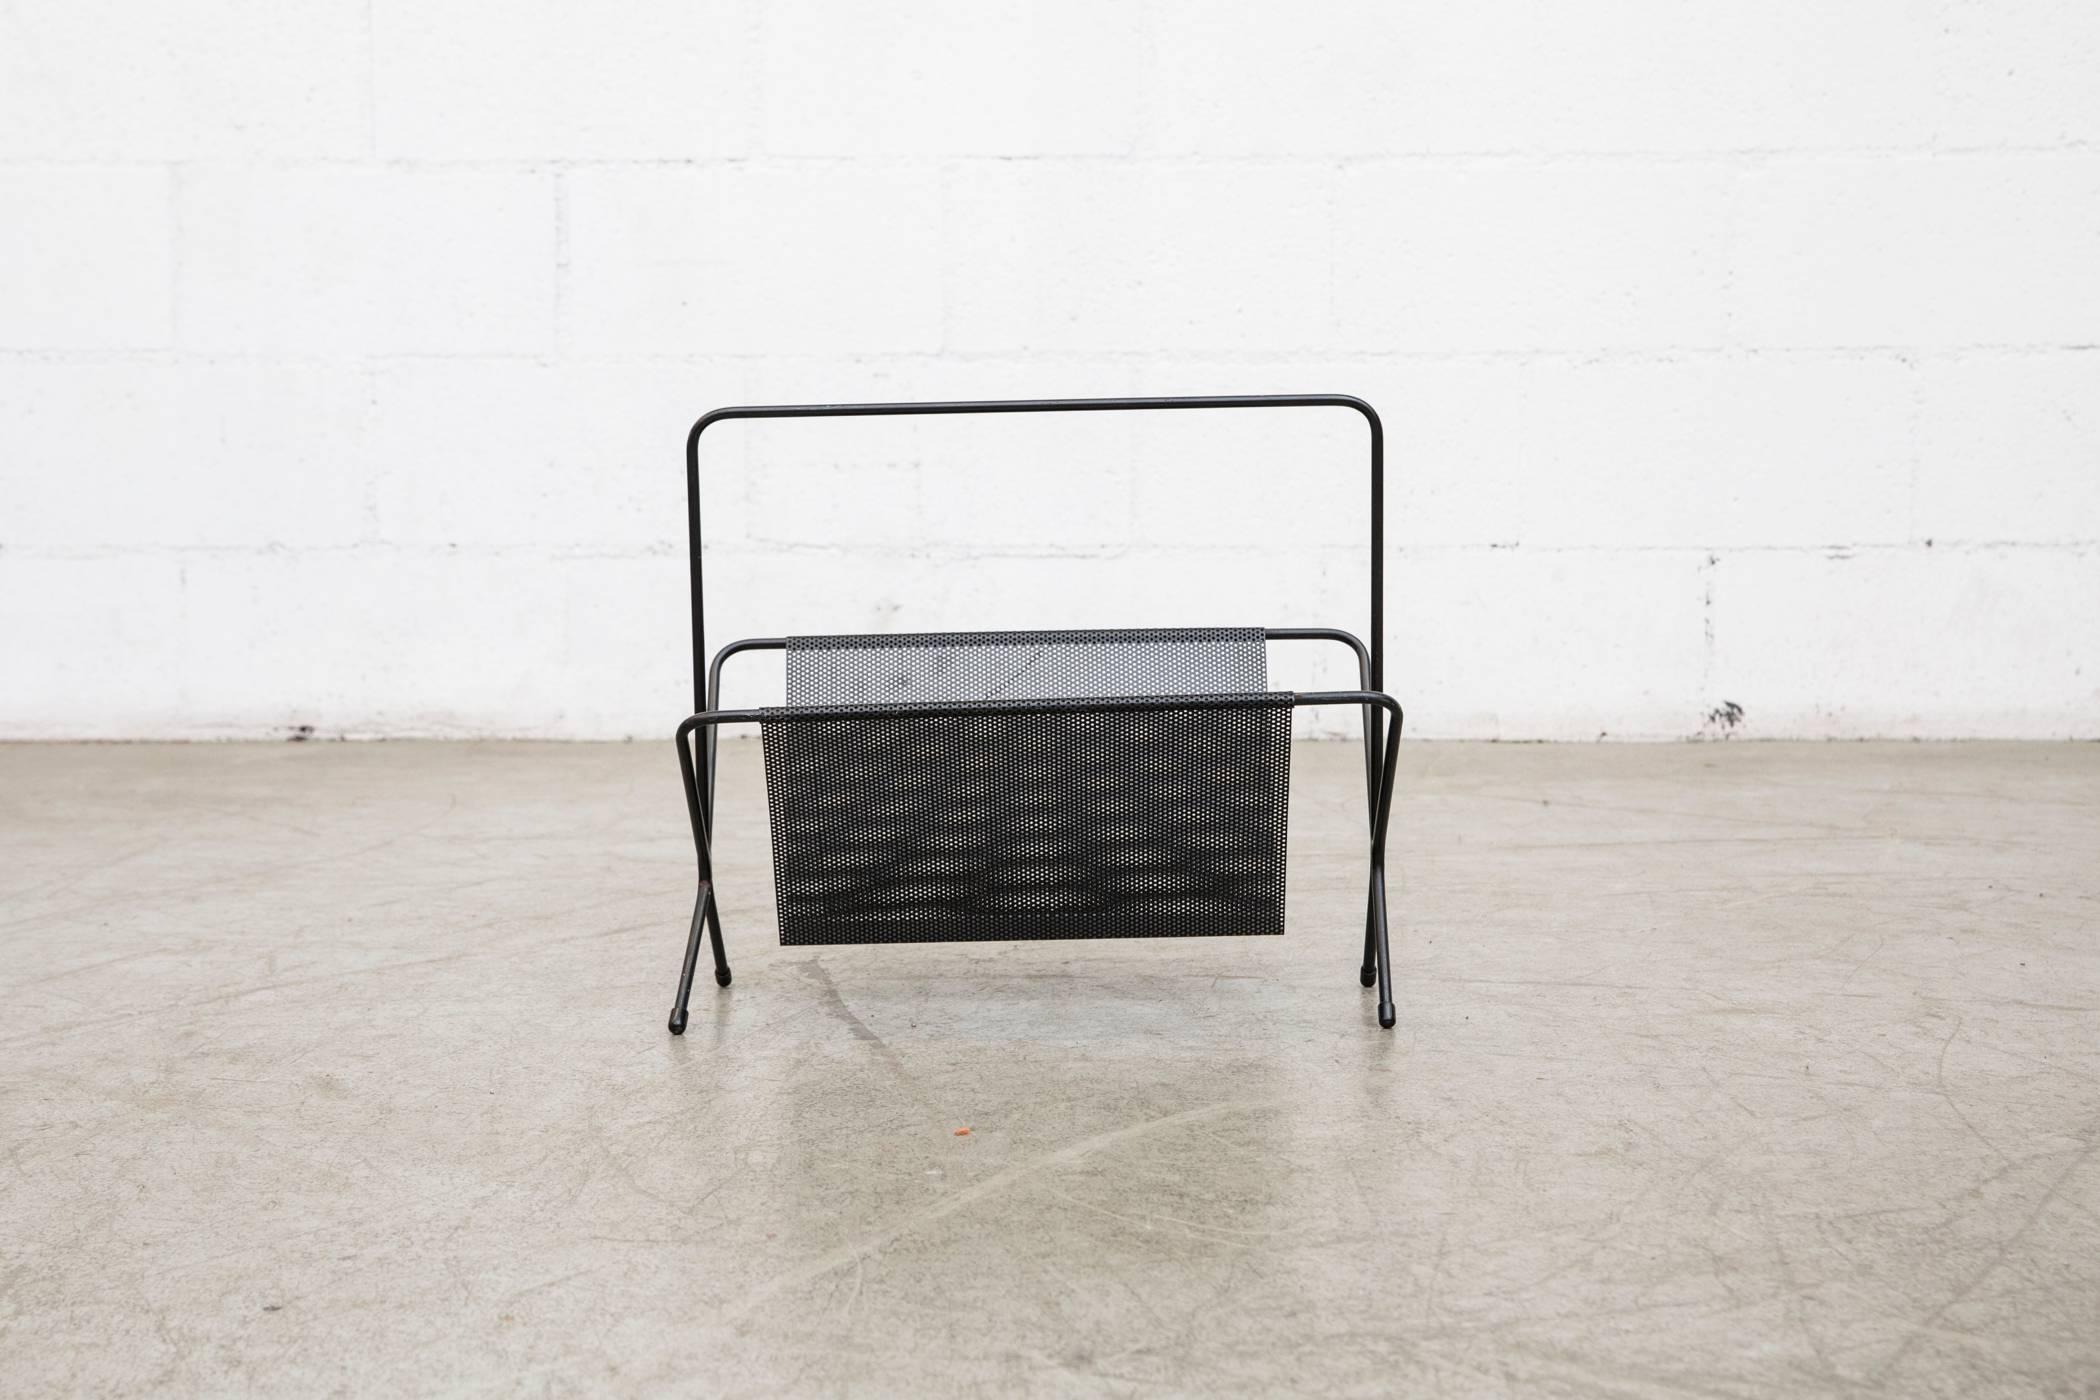 Pilastro attributed, wire framed magazine rack with black perforated metal. Visible wear, original condition.